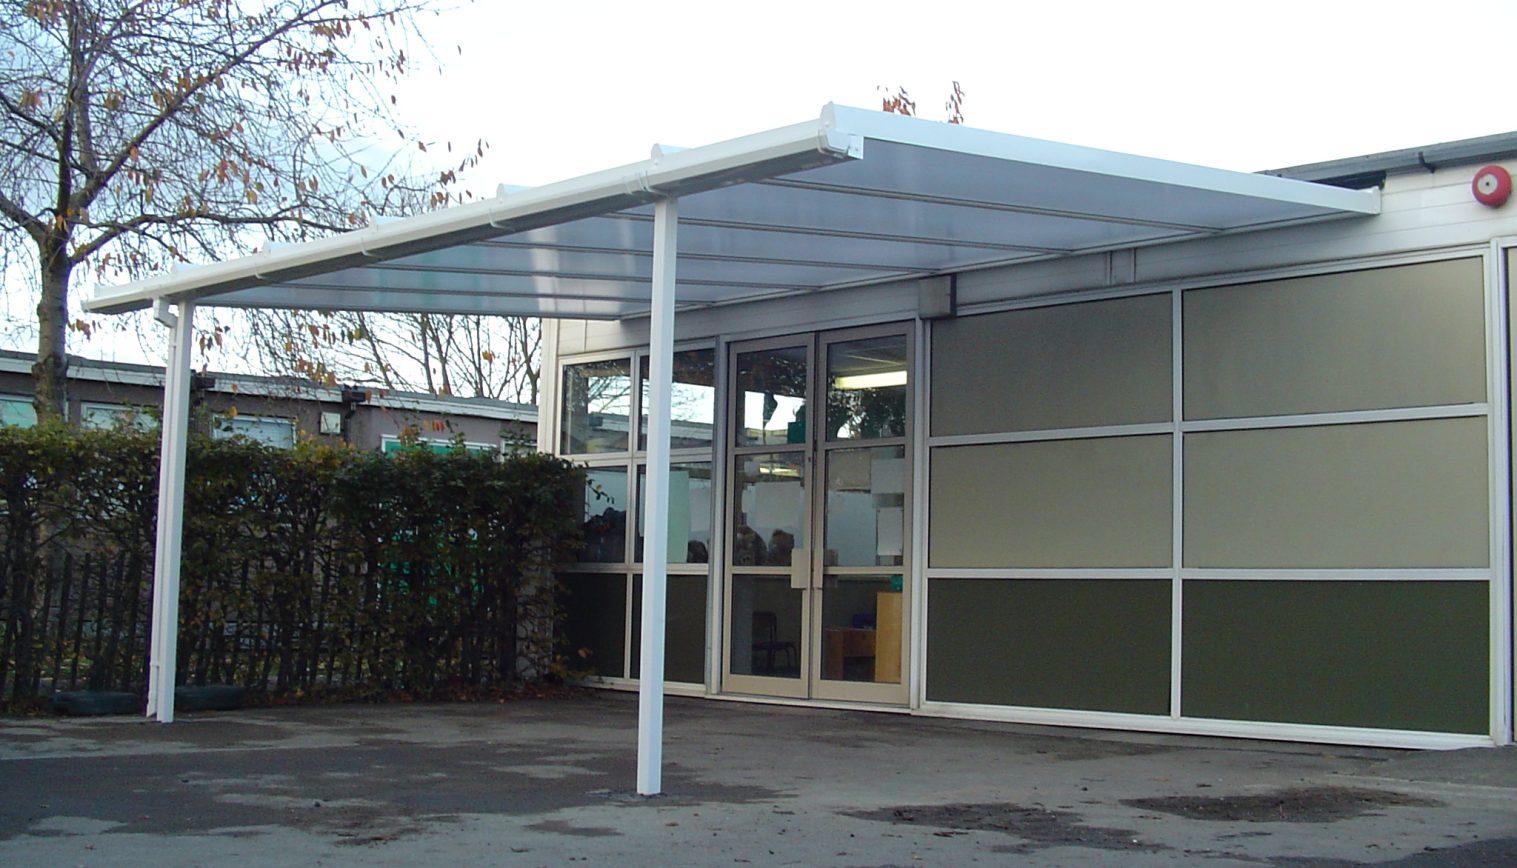 Rufford Primary School – Wall Mounted Canopy